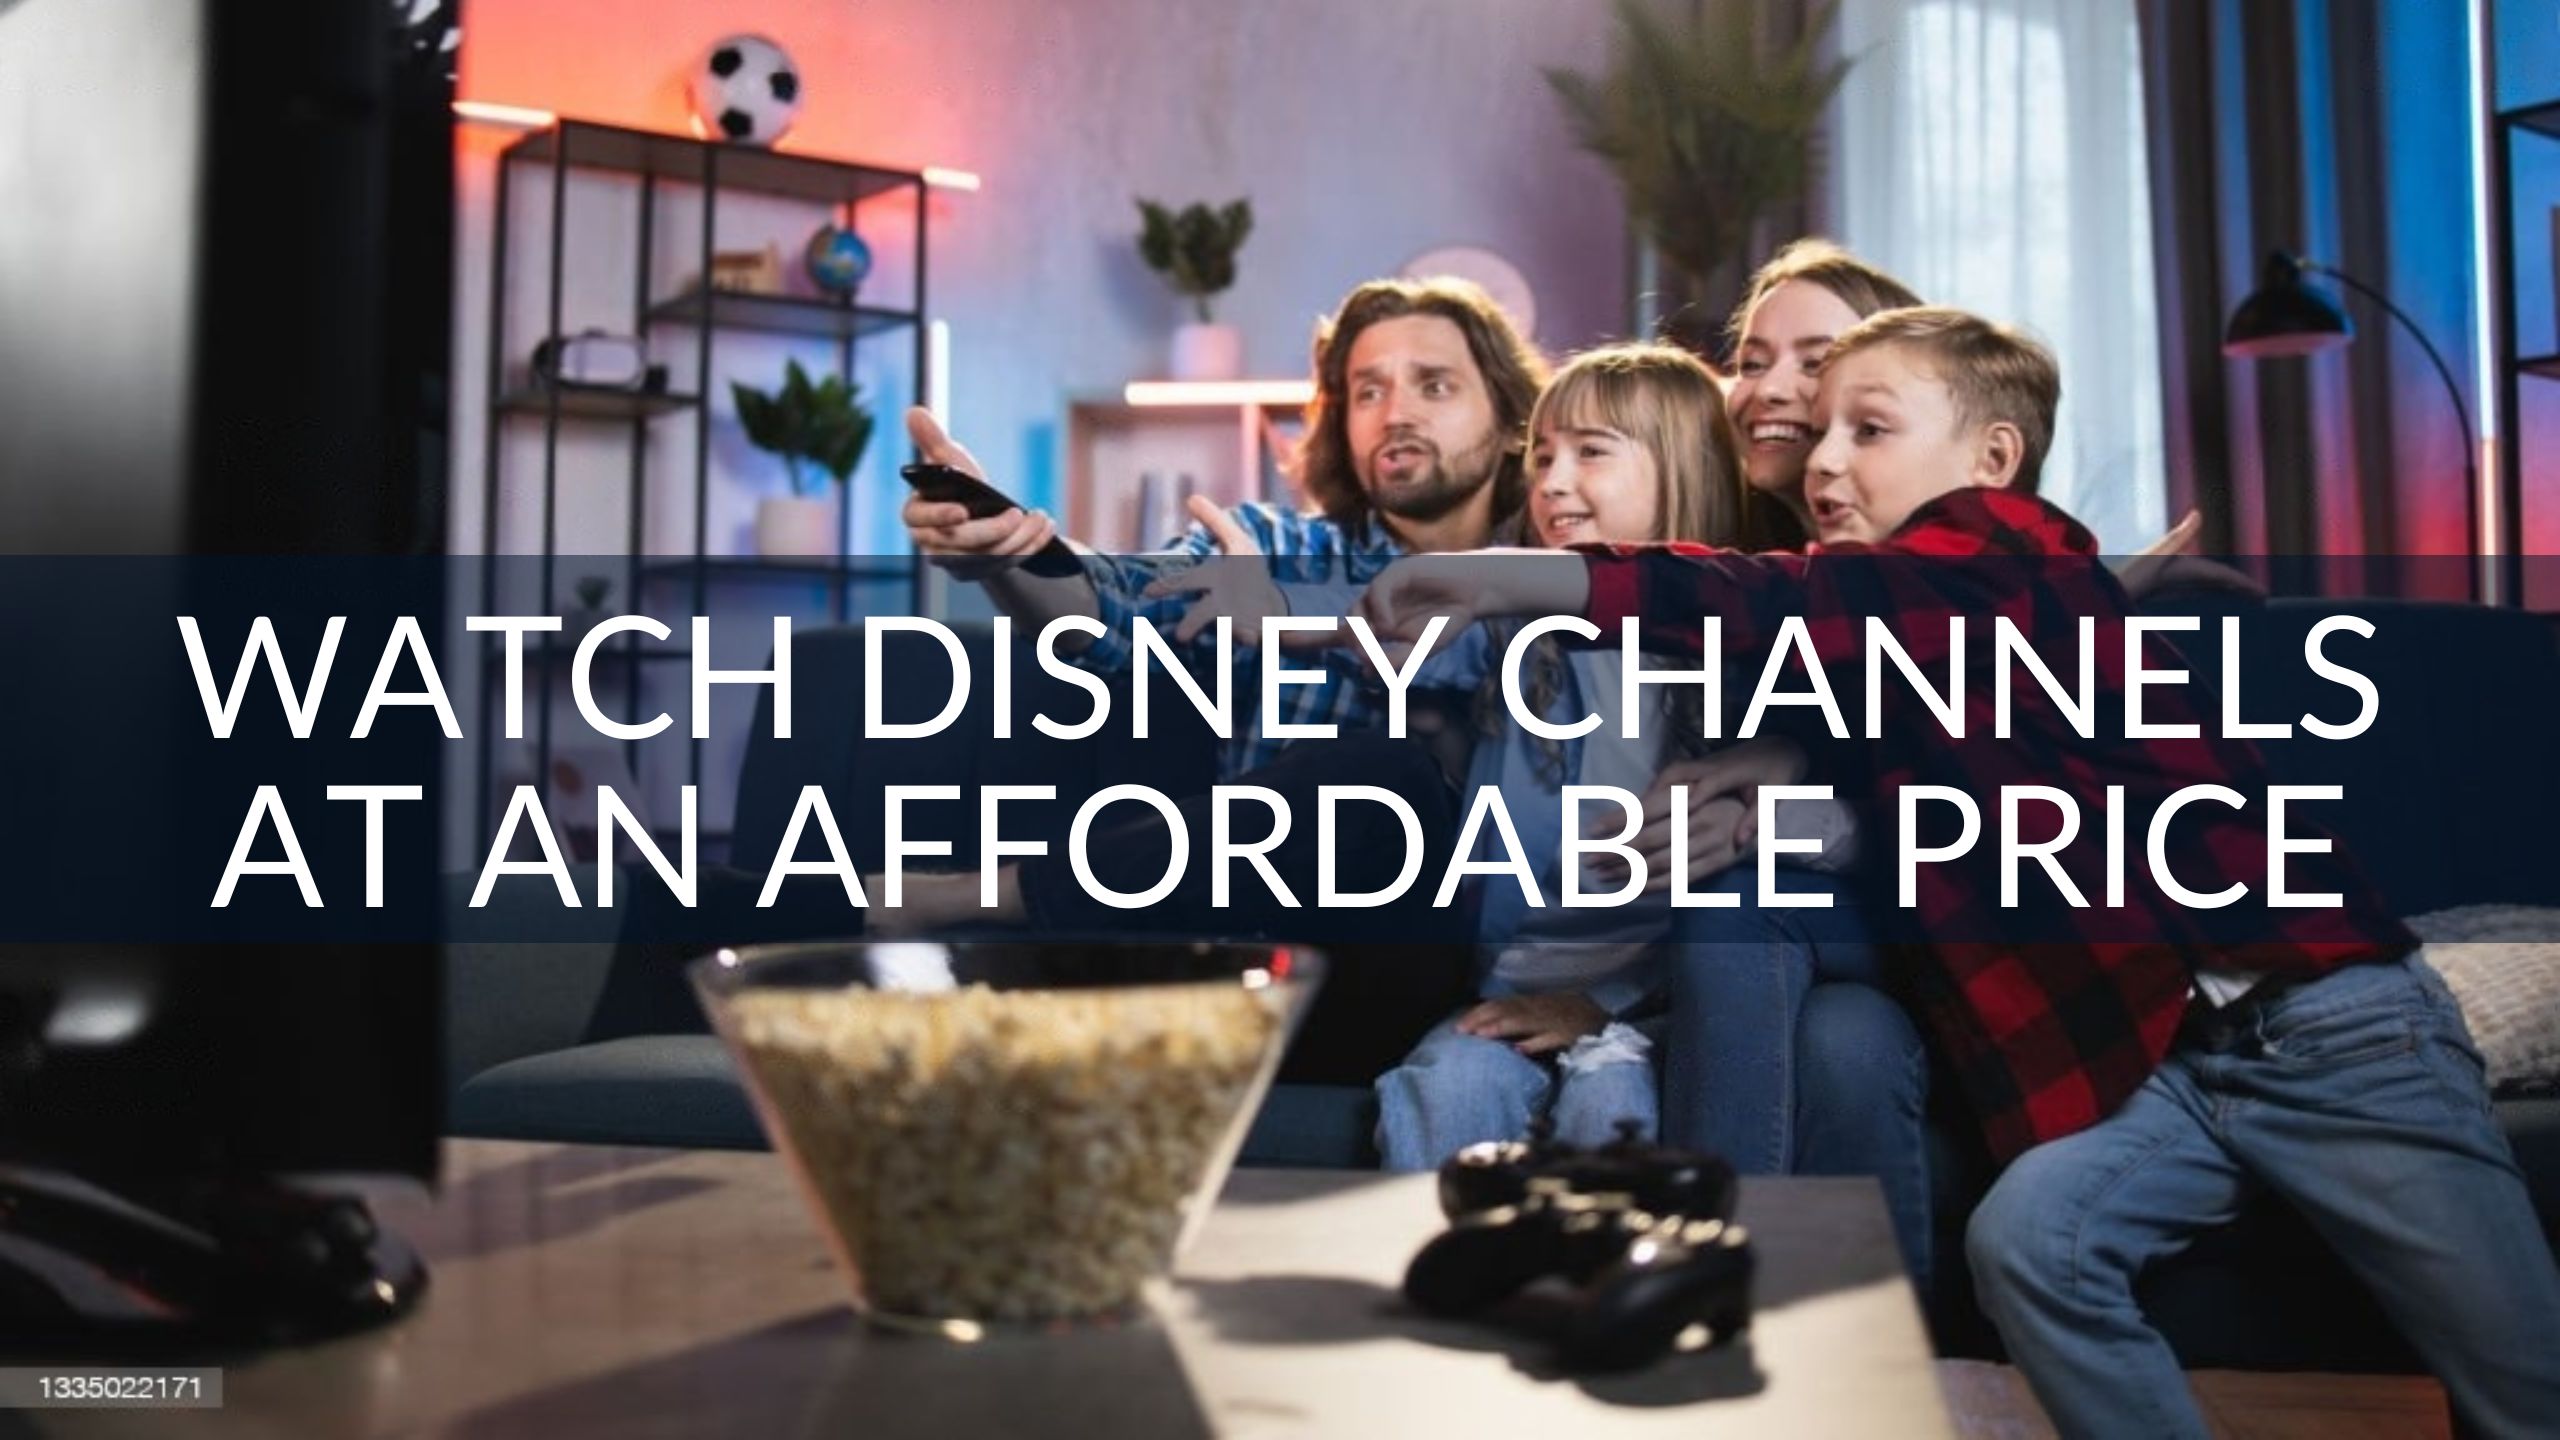 How to Watch Disney Channels IPTV at an Affordable Price